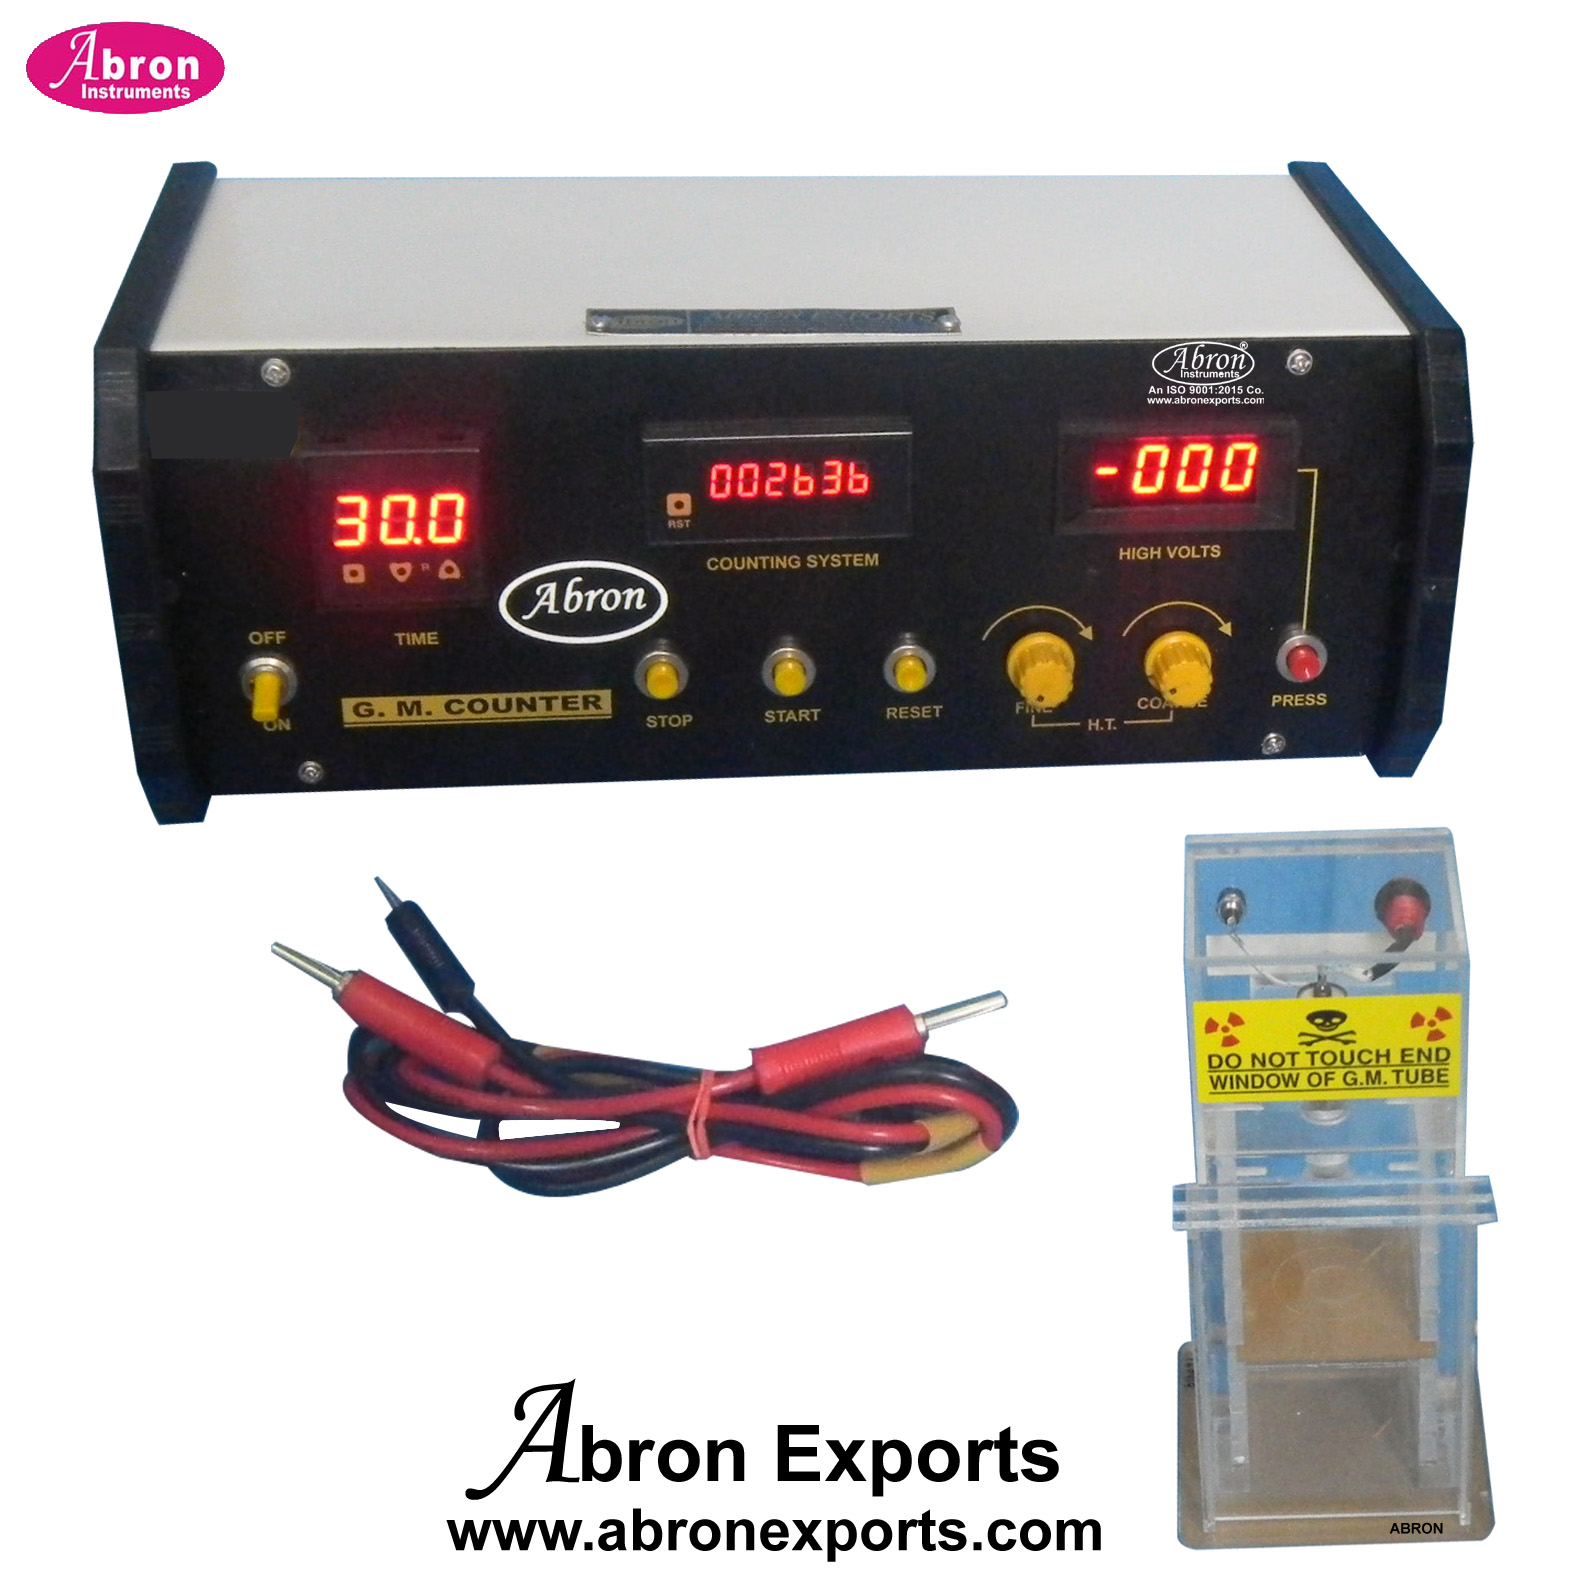 GM Counter Bsc Exp 193 Electronics To draw the plateu characteristics of a GM counter using a radio active source AEP-193 AE-1280